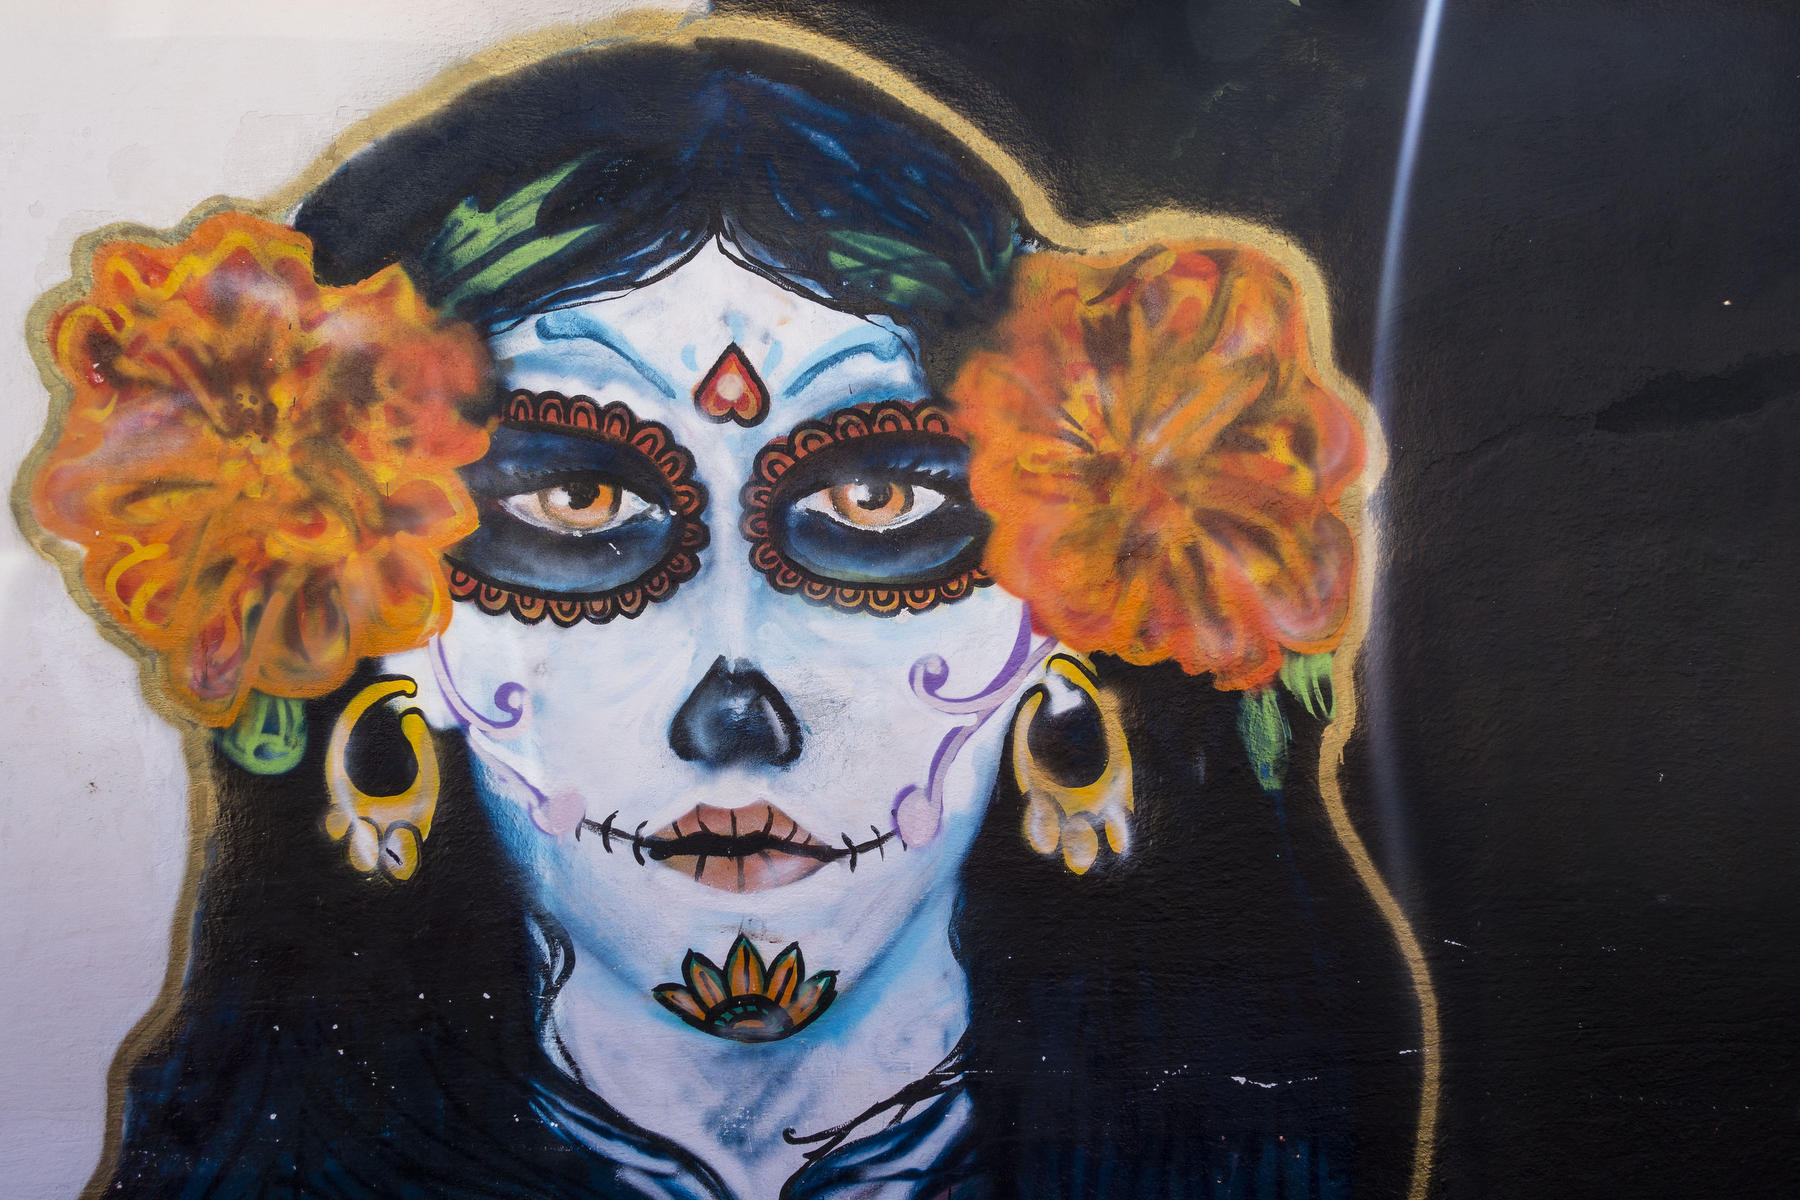 La CATRINA, symbol of The Day of the Dead on the wall of the town cemetery.  : PUERTO VALLARTA - Wall Art & Bicycle Tour : Viviane Moos |  Documentary Photographer